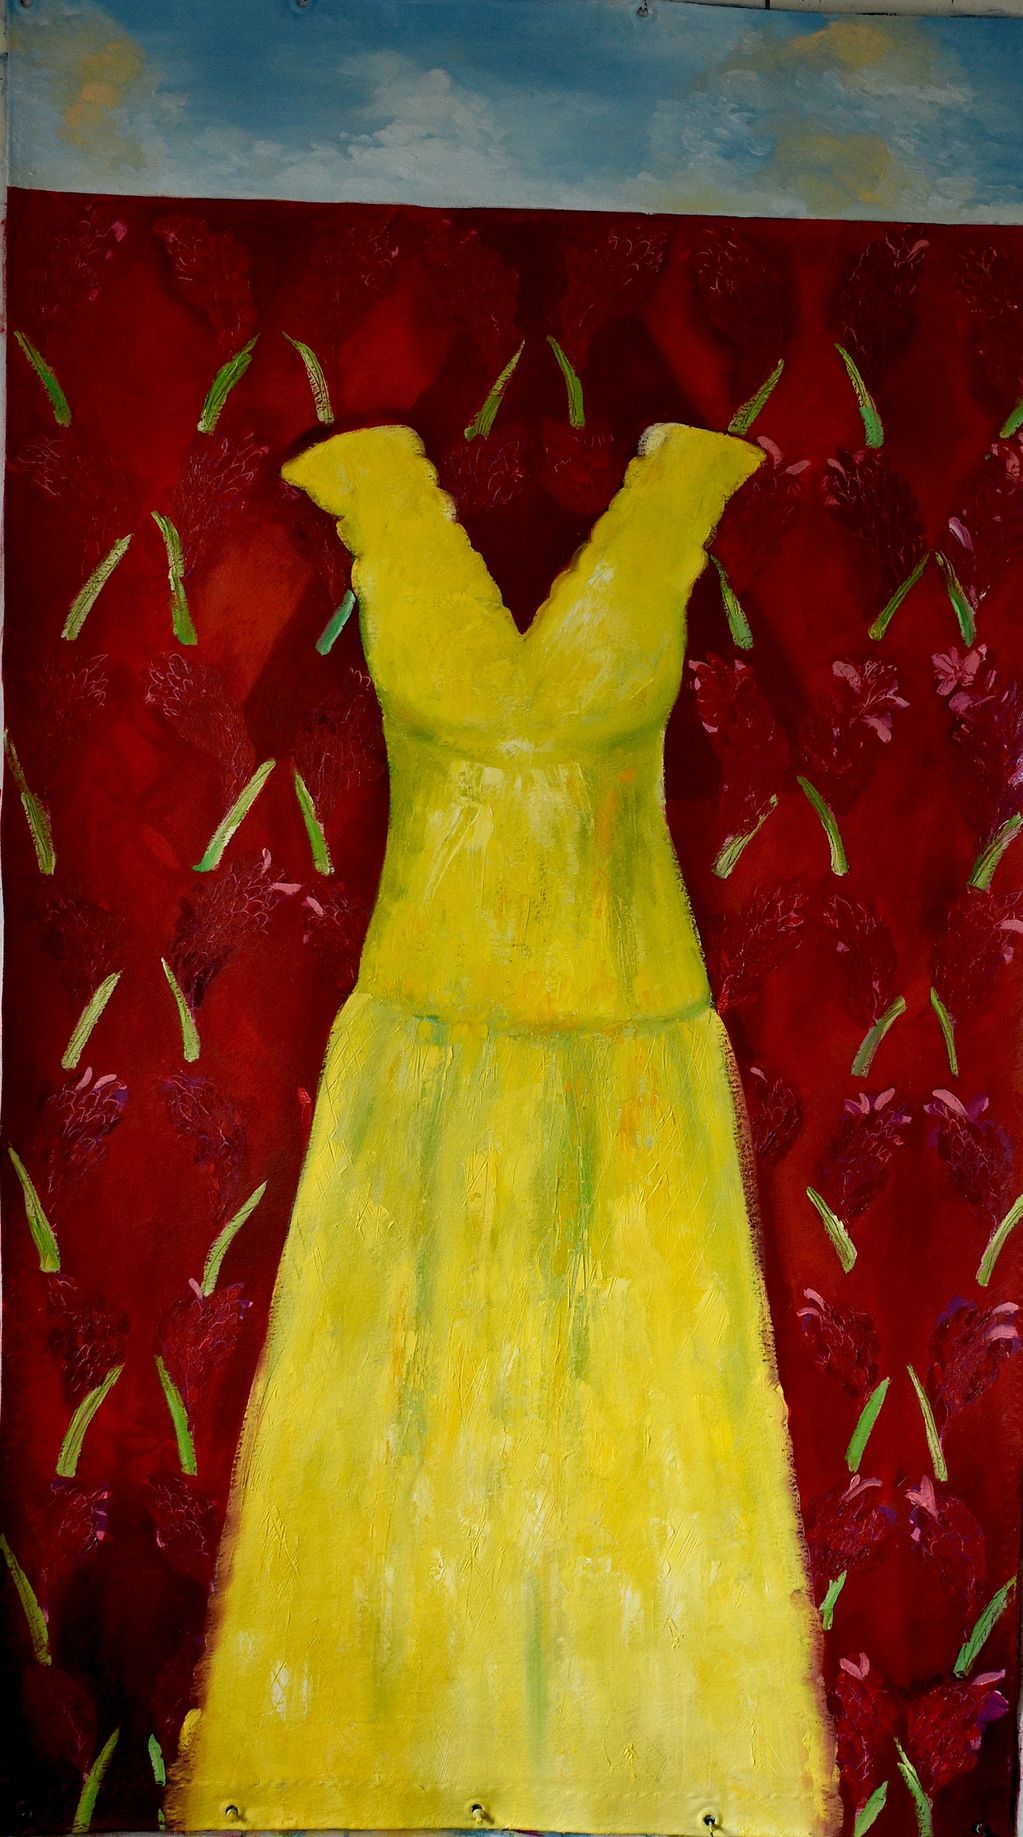 Yellow dress against floral background.